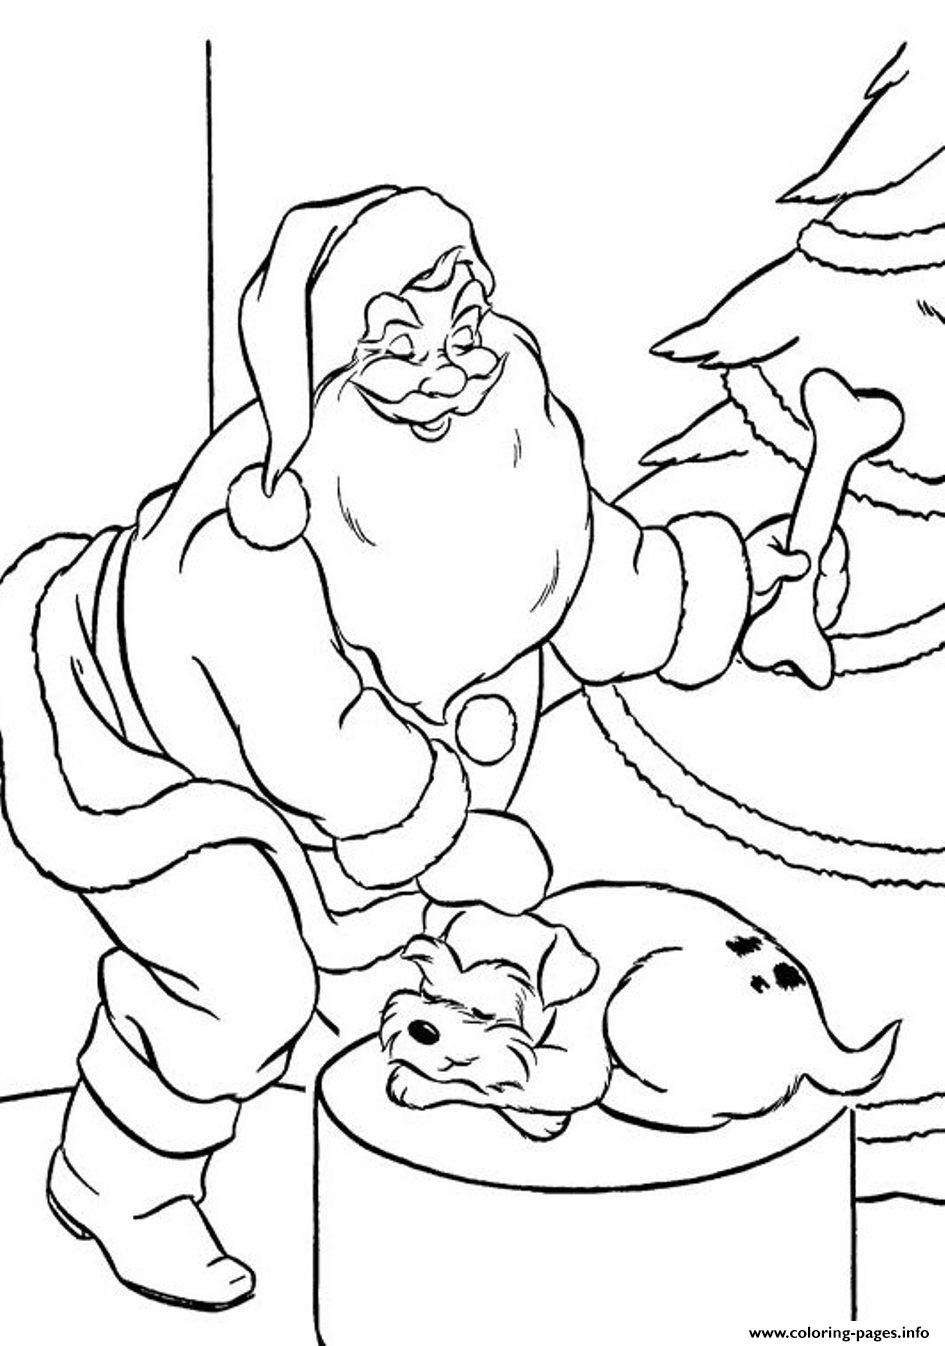 Coloring Pages Of Santa Claus And Puppys Present54da coloring